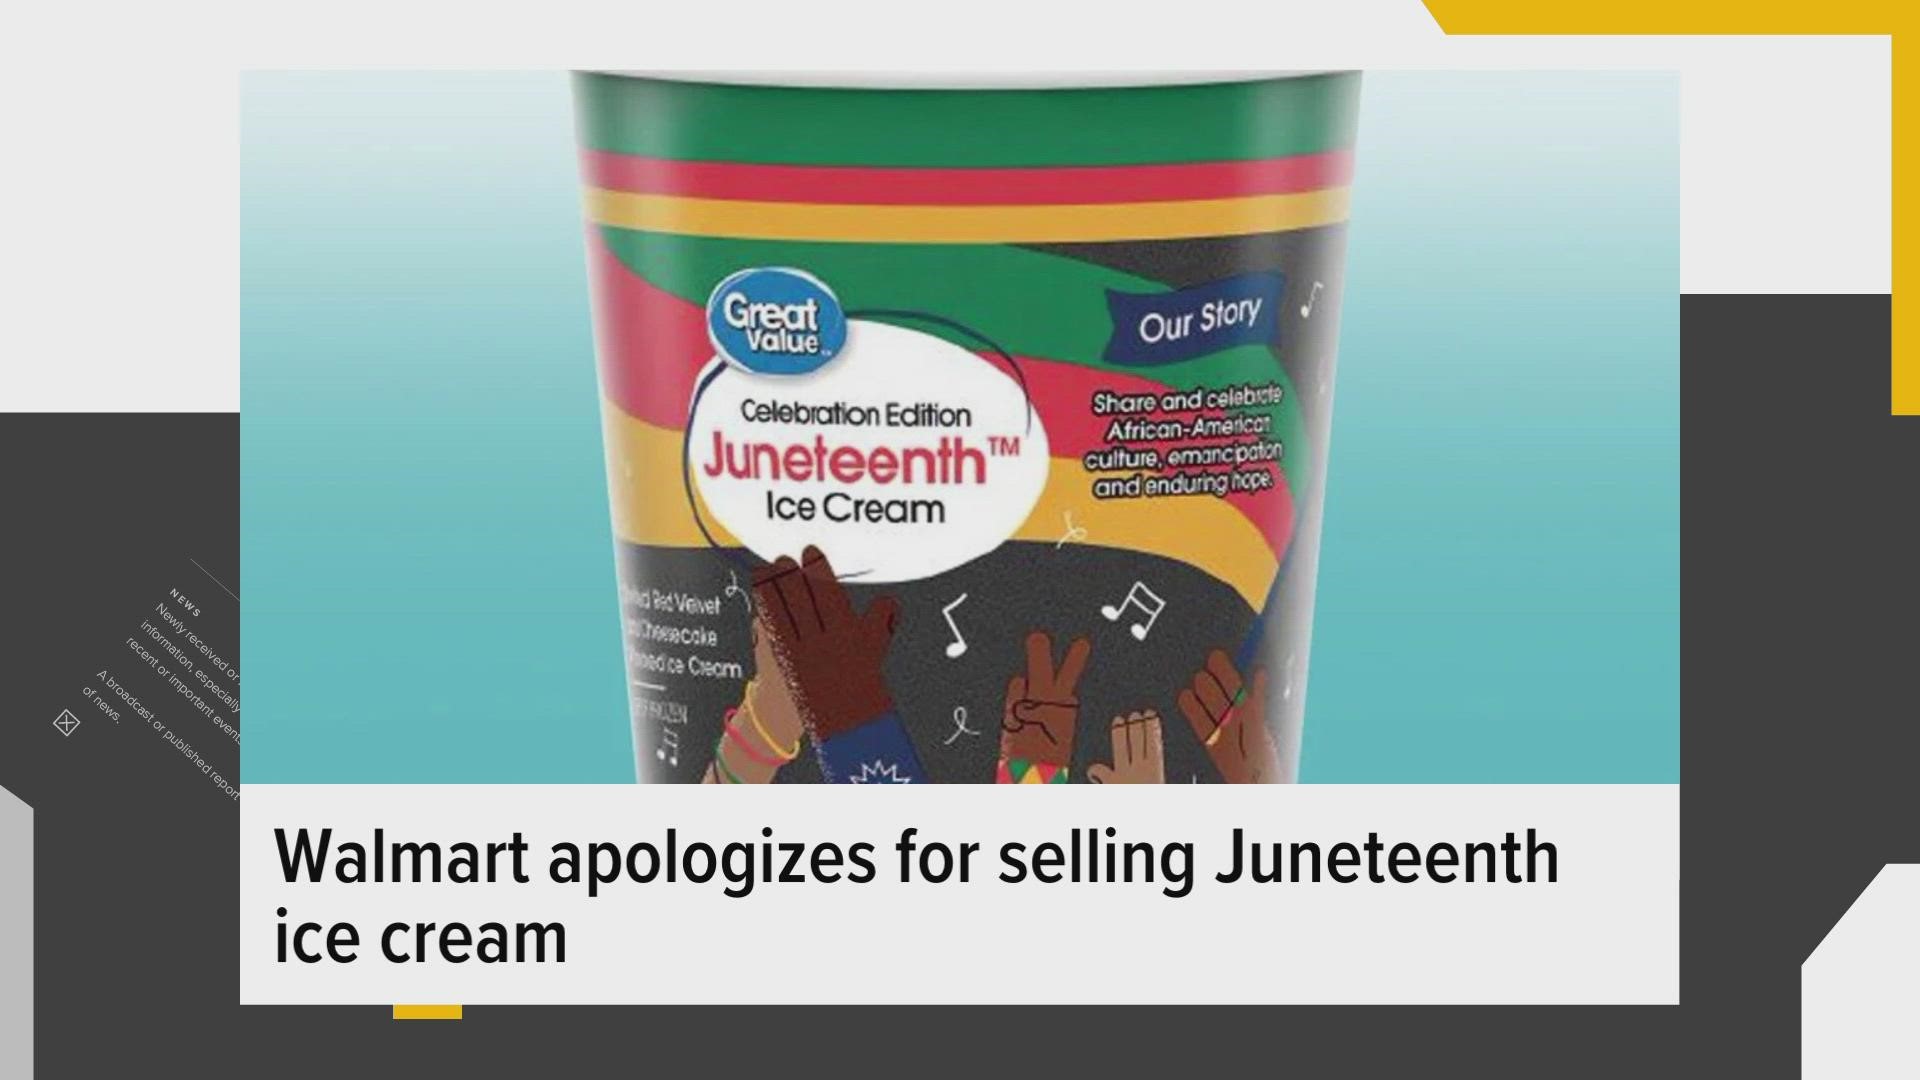 The company pulled back the product after receiving criticism from the public.